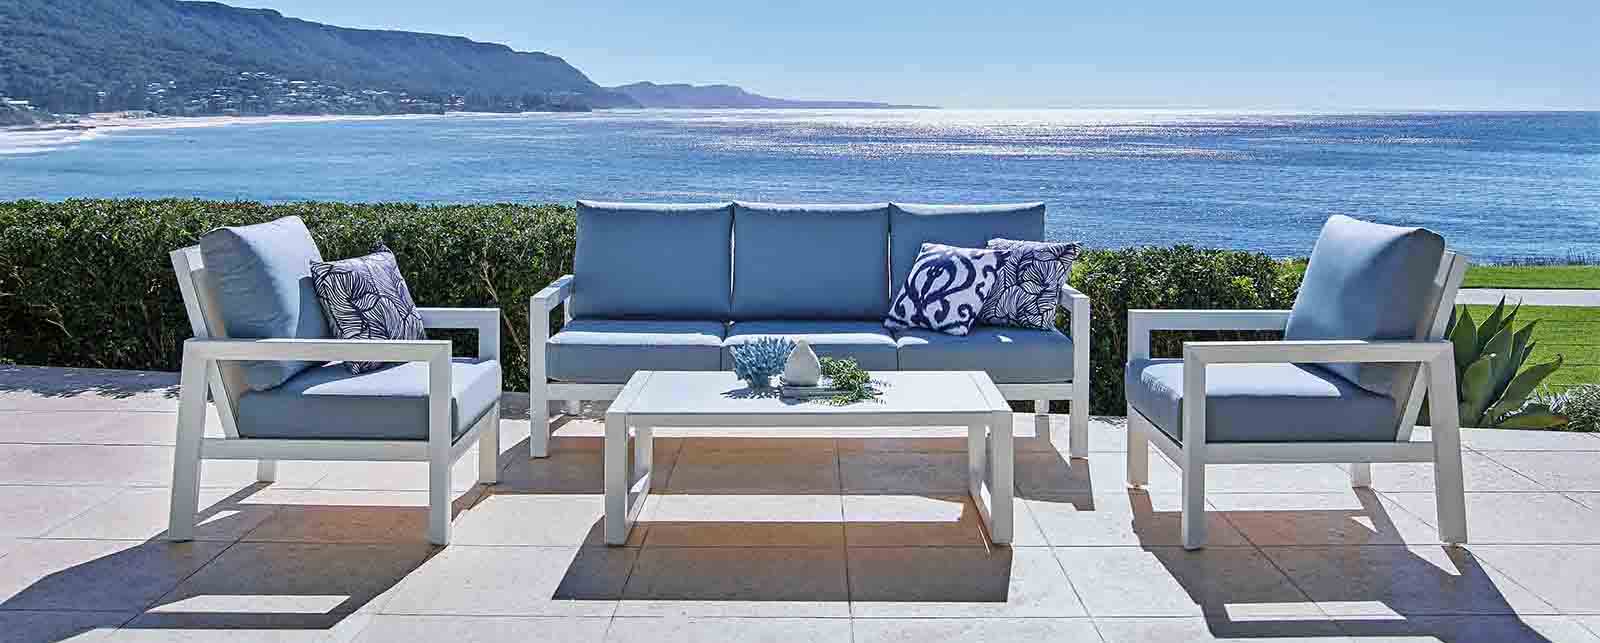 4 Outdoor Furniture Trends Aluminium, Outdoor Timber Chairs With Cushions